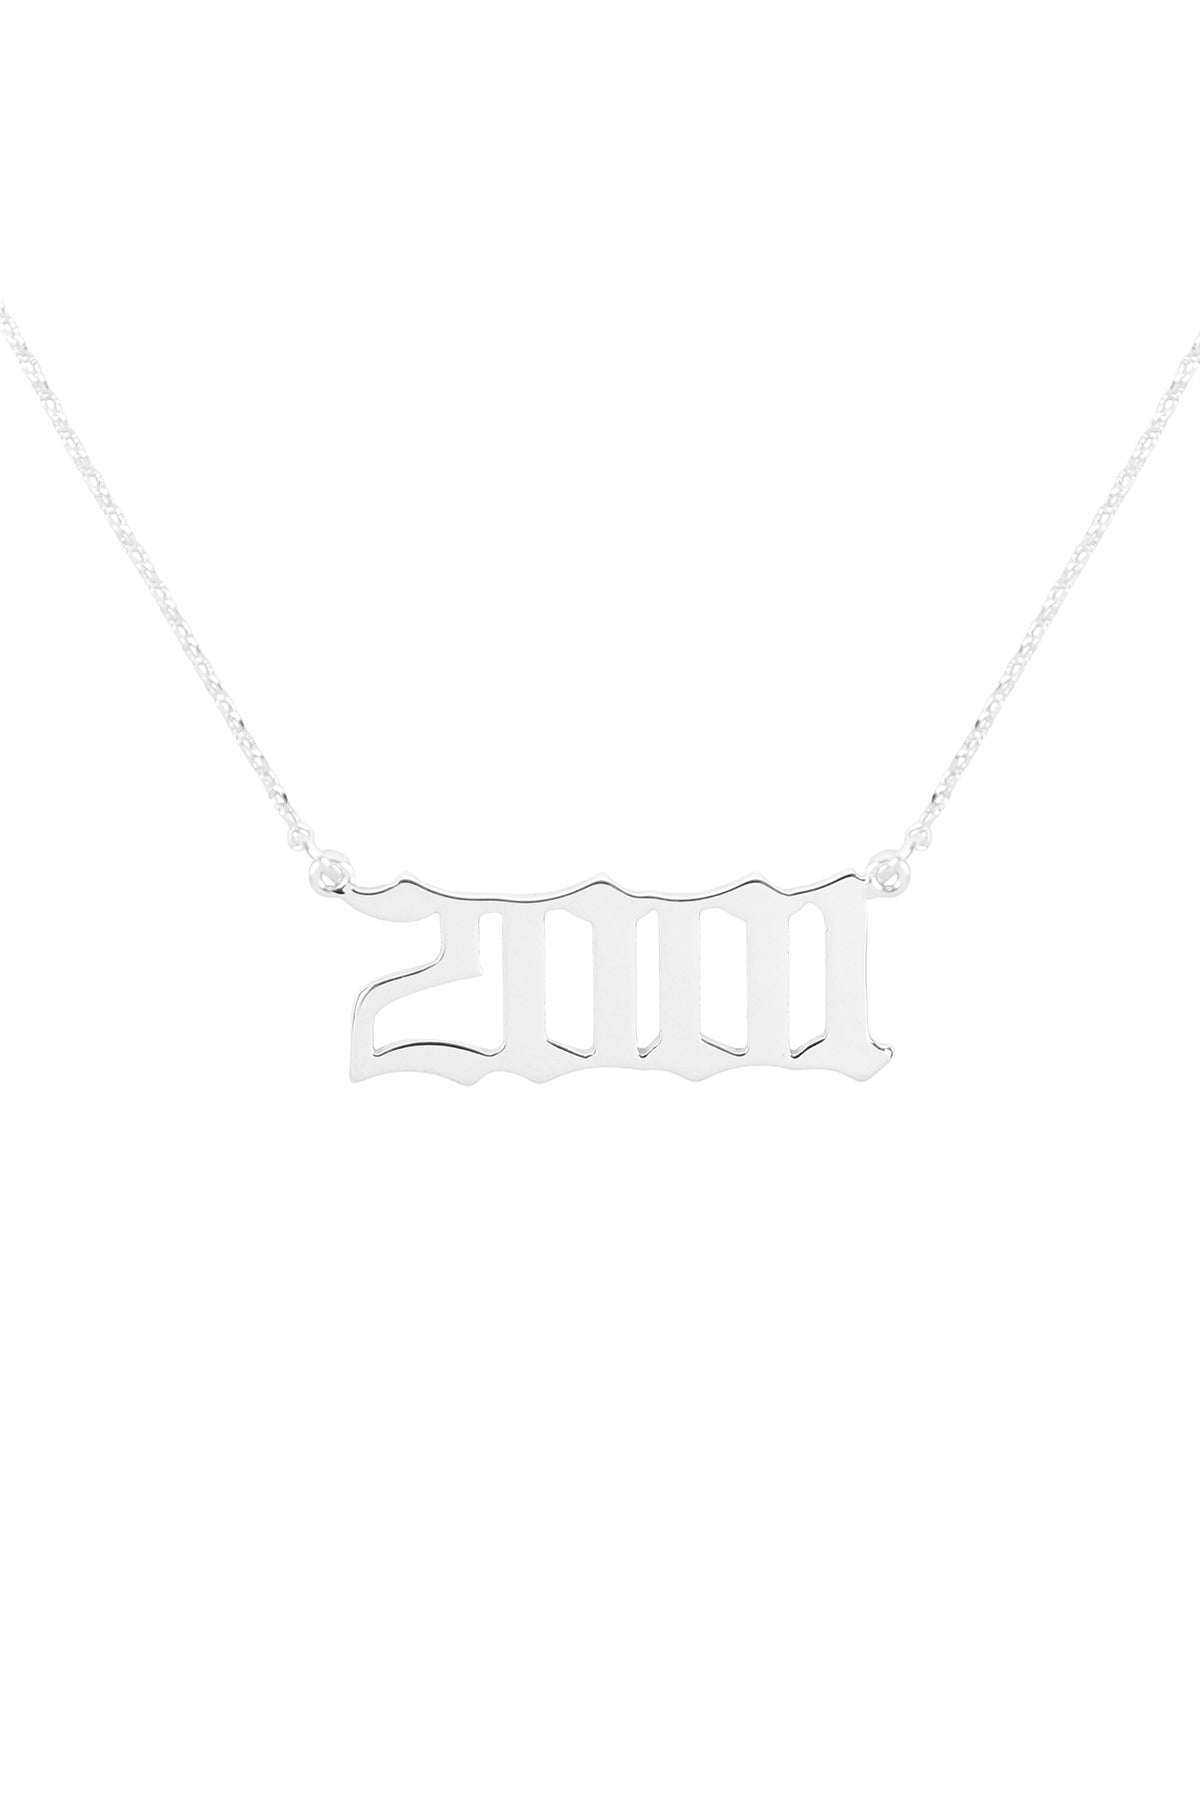 "2001" BIRTH YEAR PERSONALIZED NECKLACE